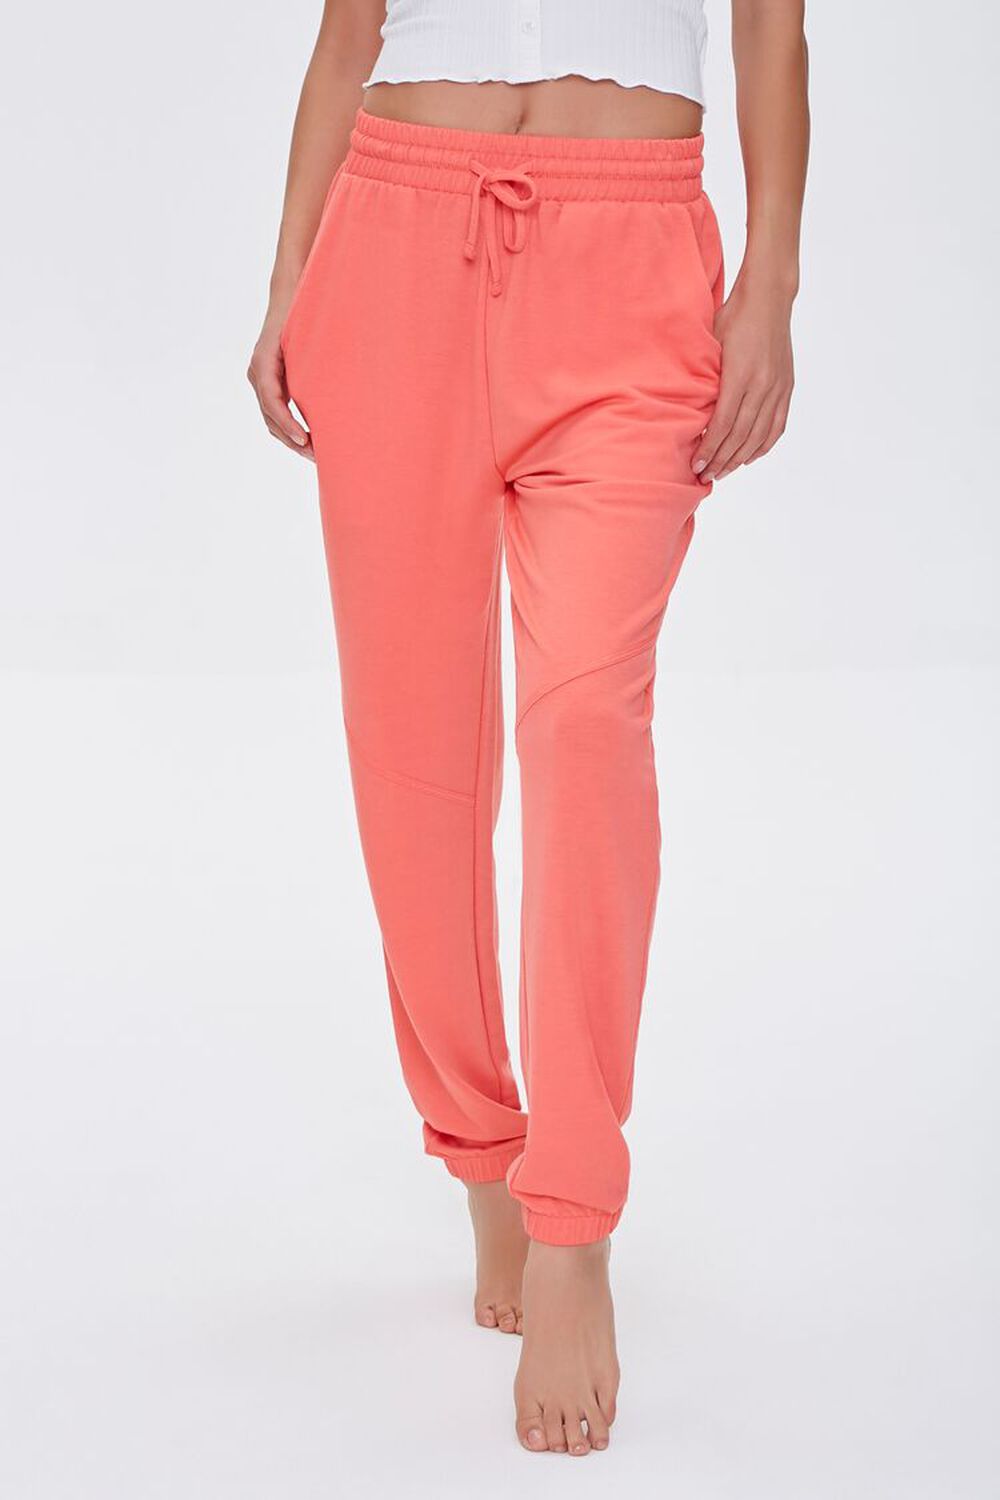 NEON CORAL French Terry Drawstring Joggers, image 2